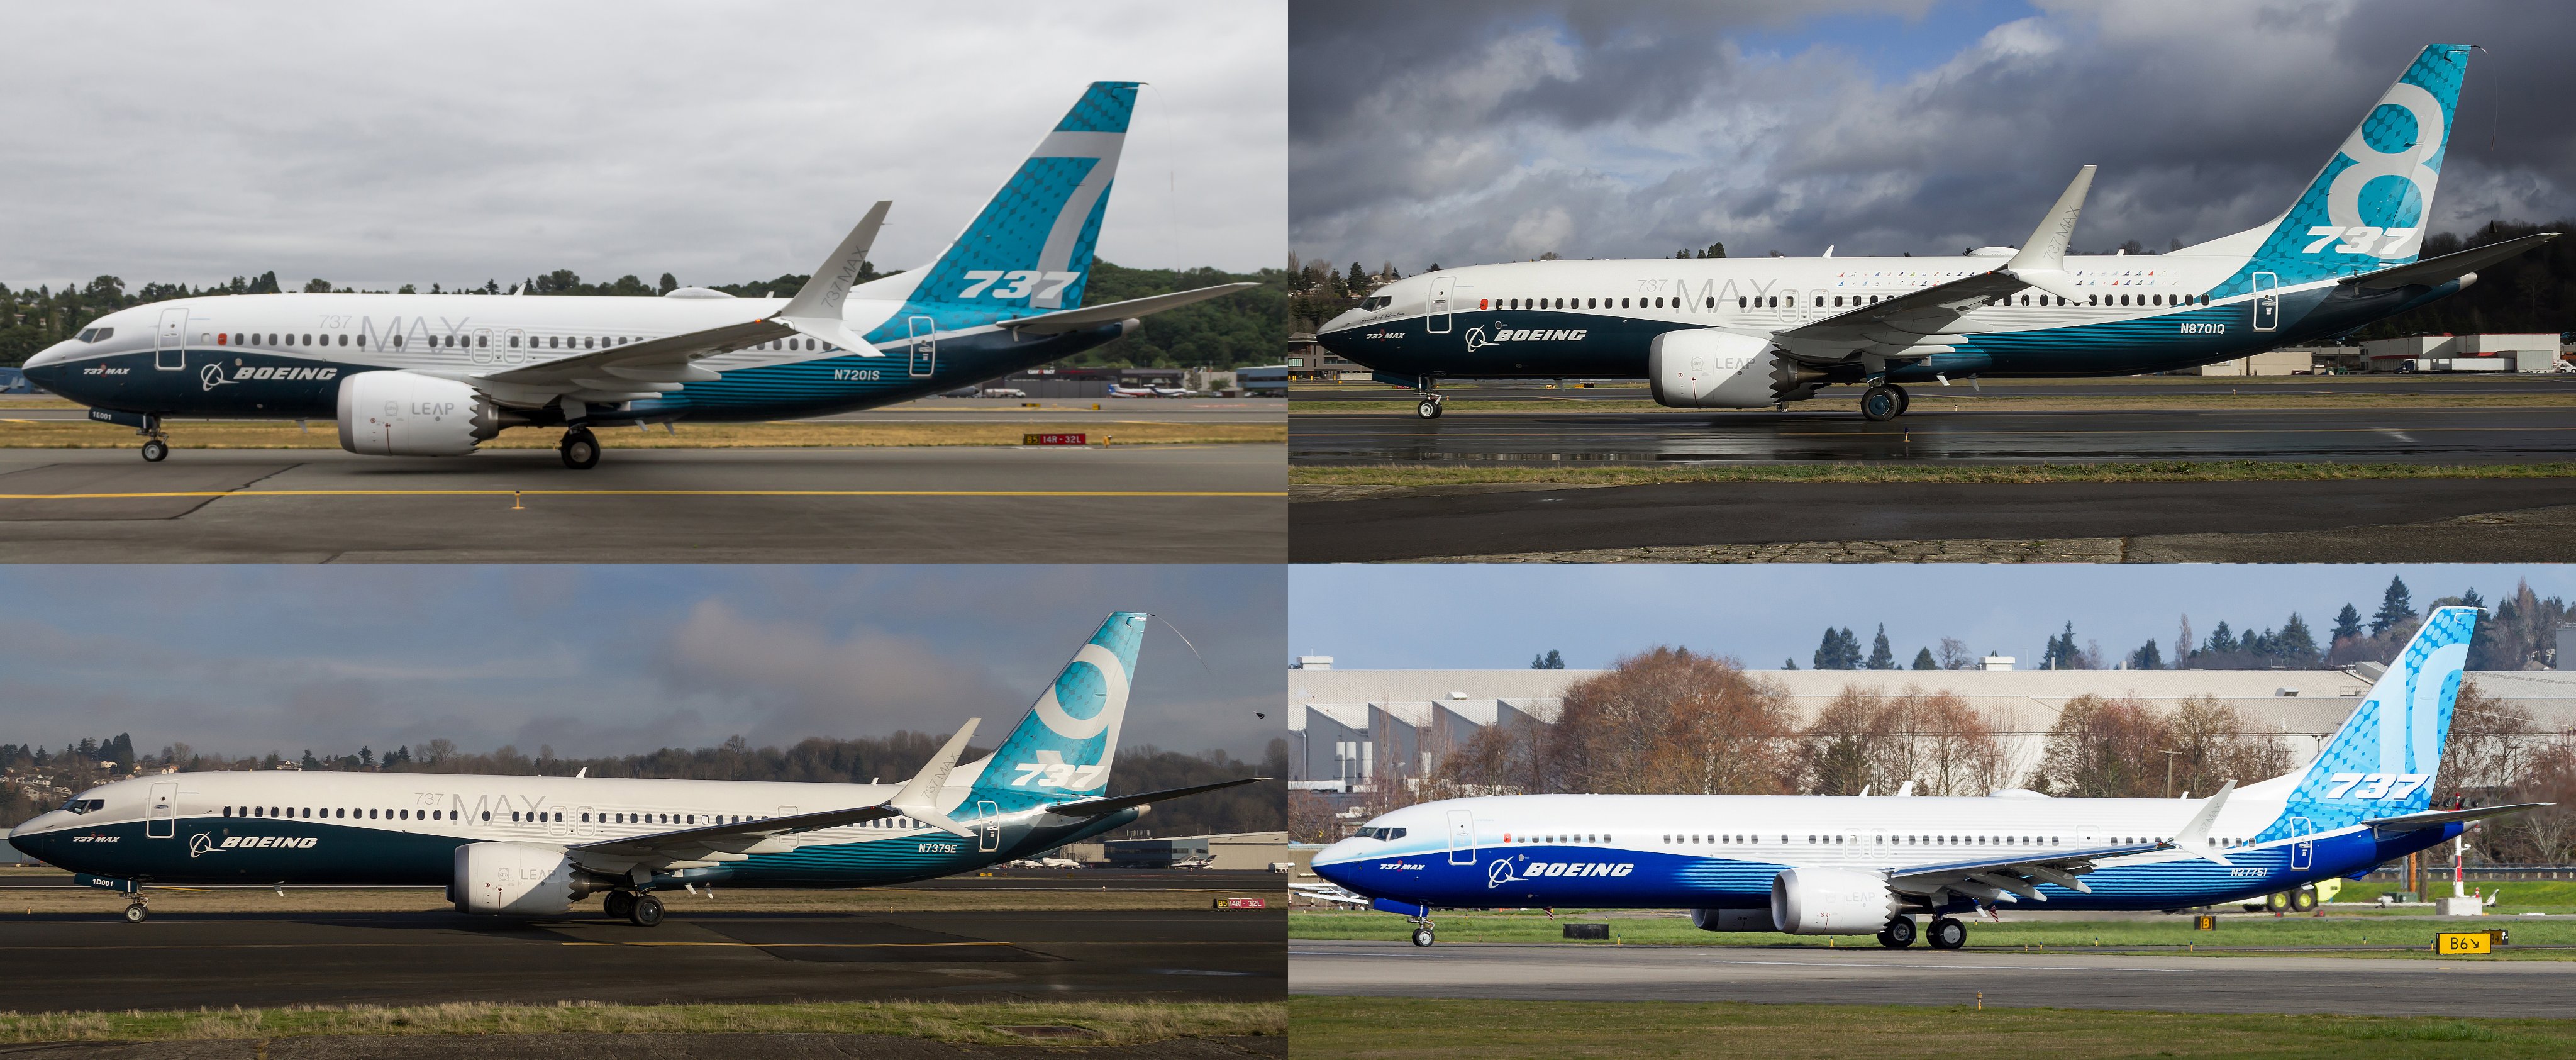 Woodys Aeroimages on Twitter: "Updated the #737MAX family picture on the  Blog to include all 4 test plane variants. https://t.co/HlAkUQl43A  https://t.co/jJo1vNbDy2" / Twitter